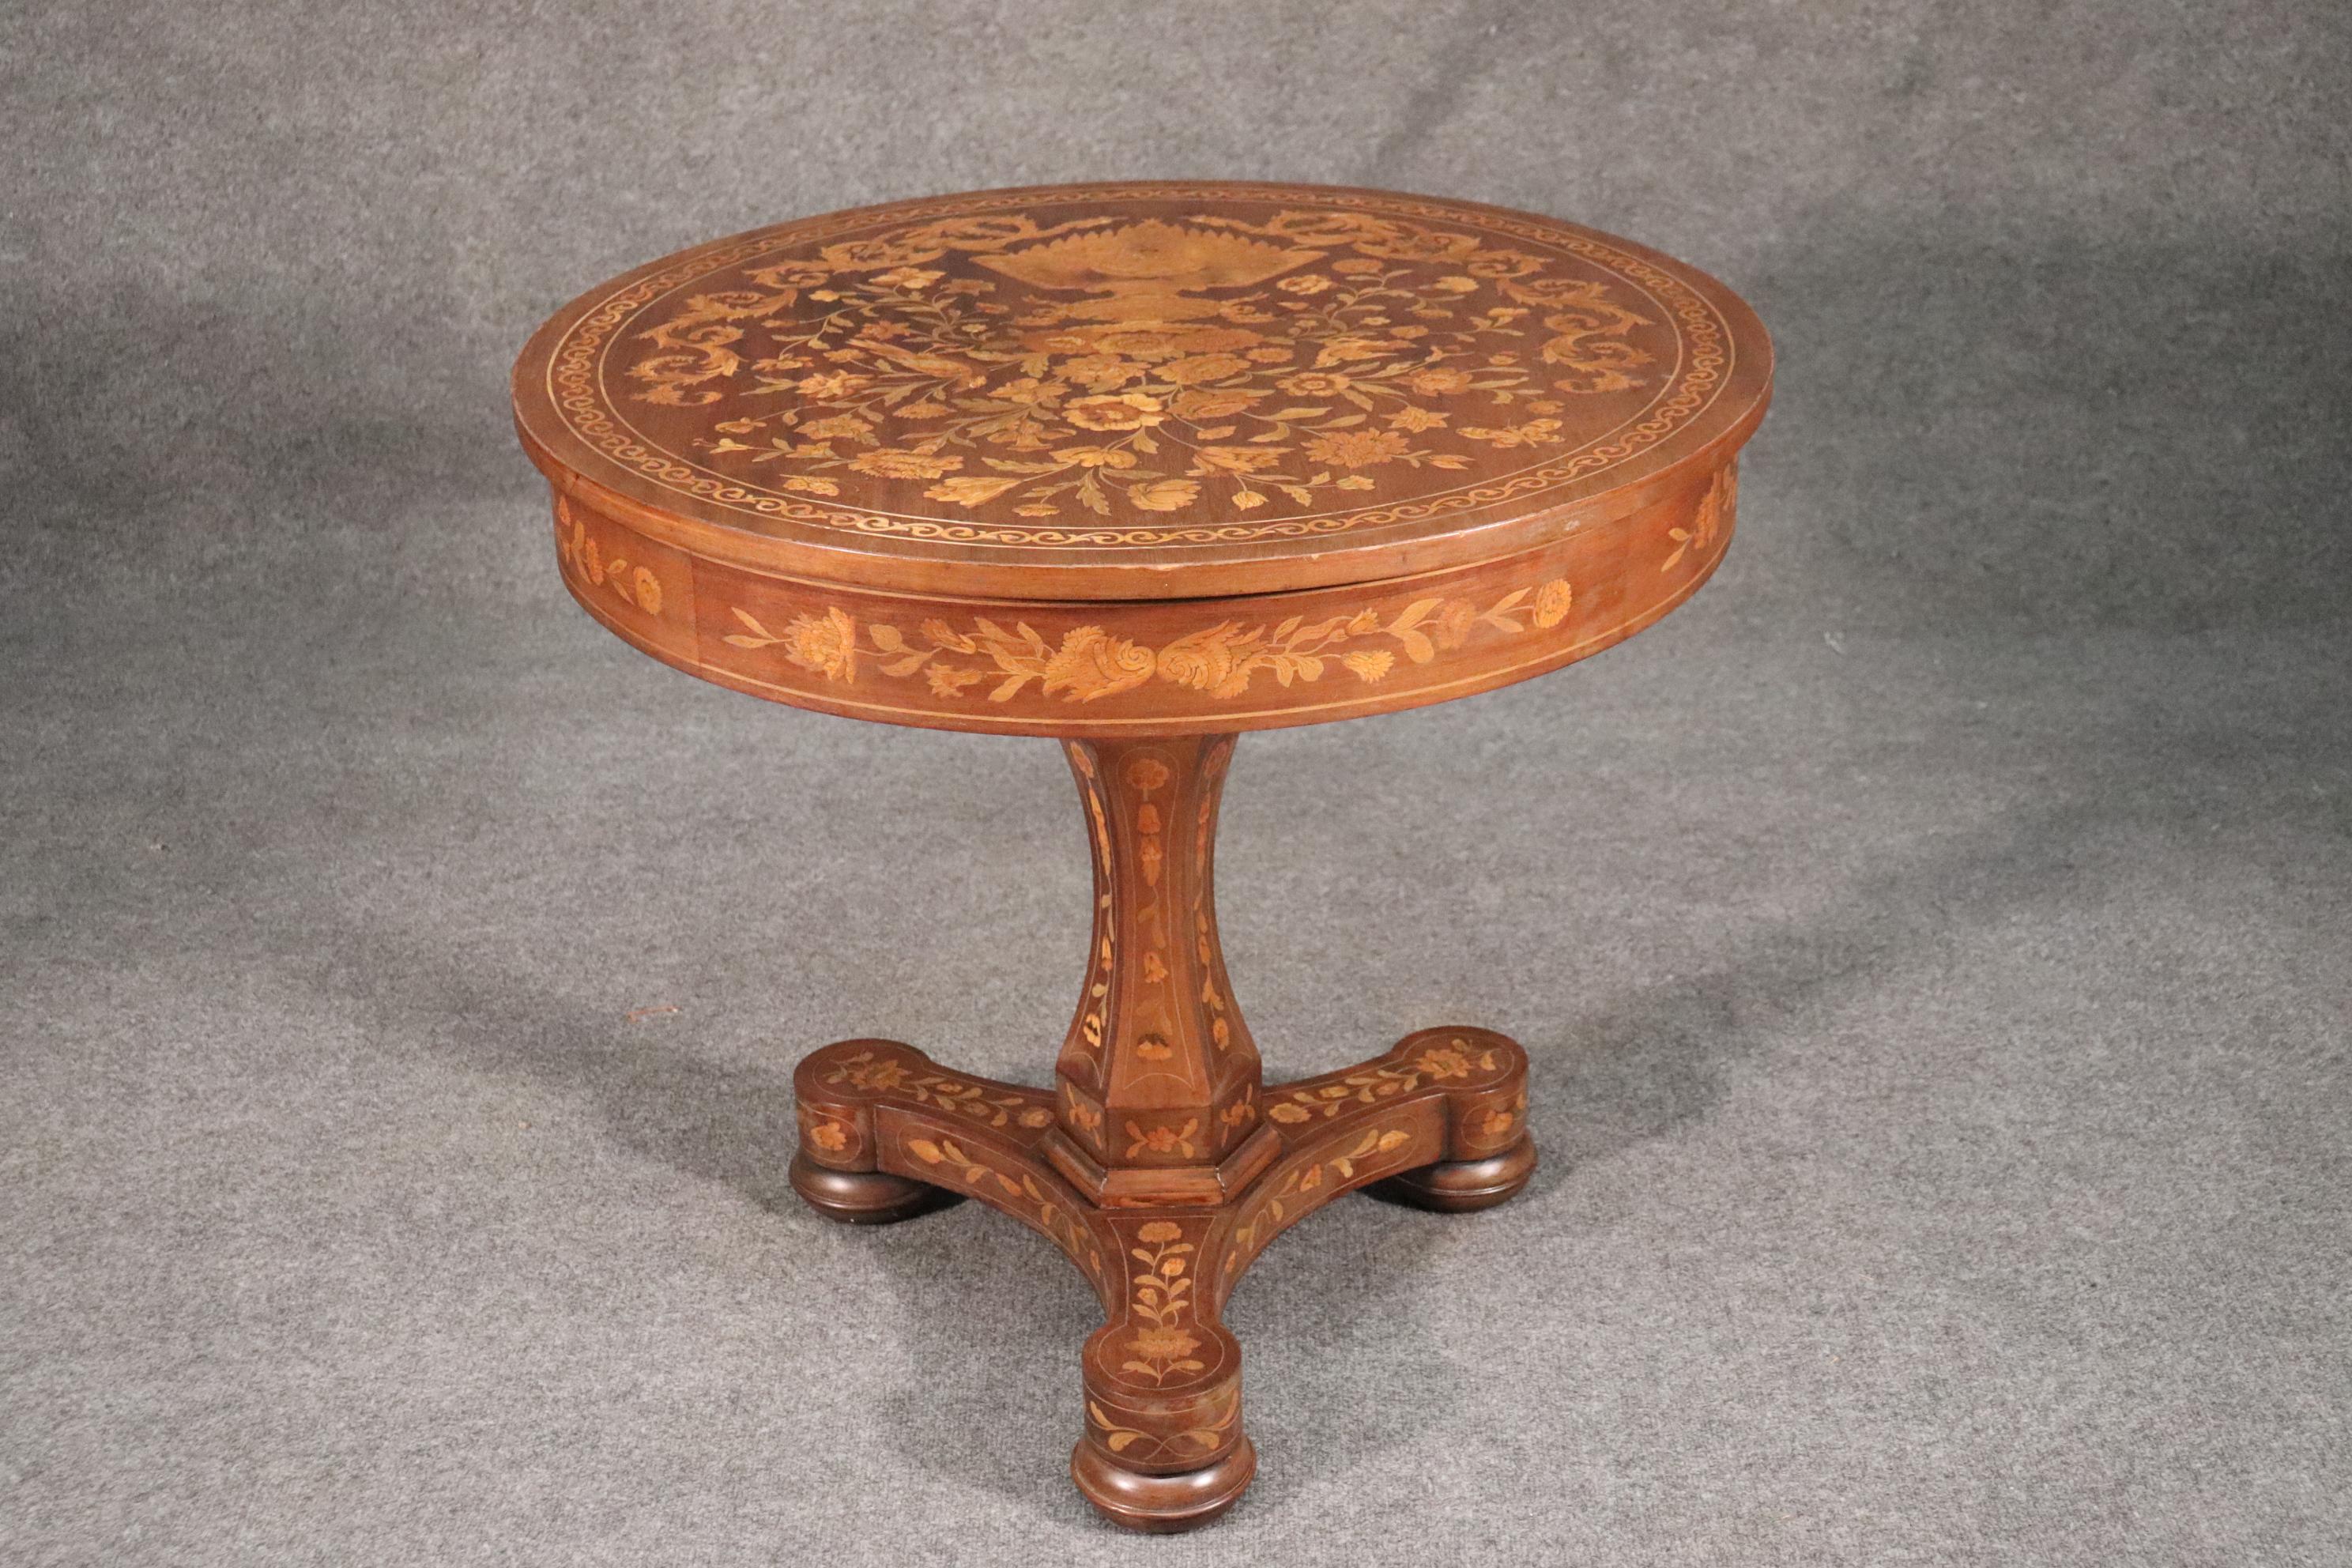 Art Nouveau Late 19th Century Inlaid Dutch Marquetry Mahogany and Satinwood Center Table